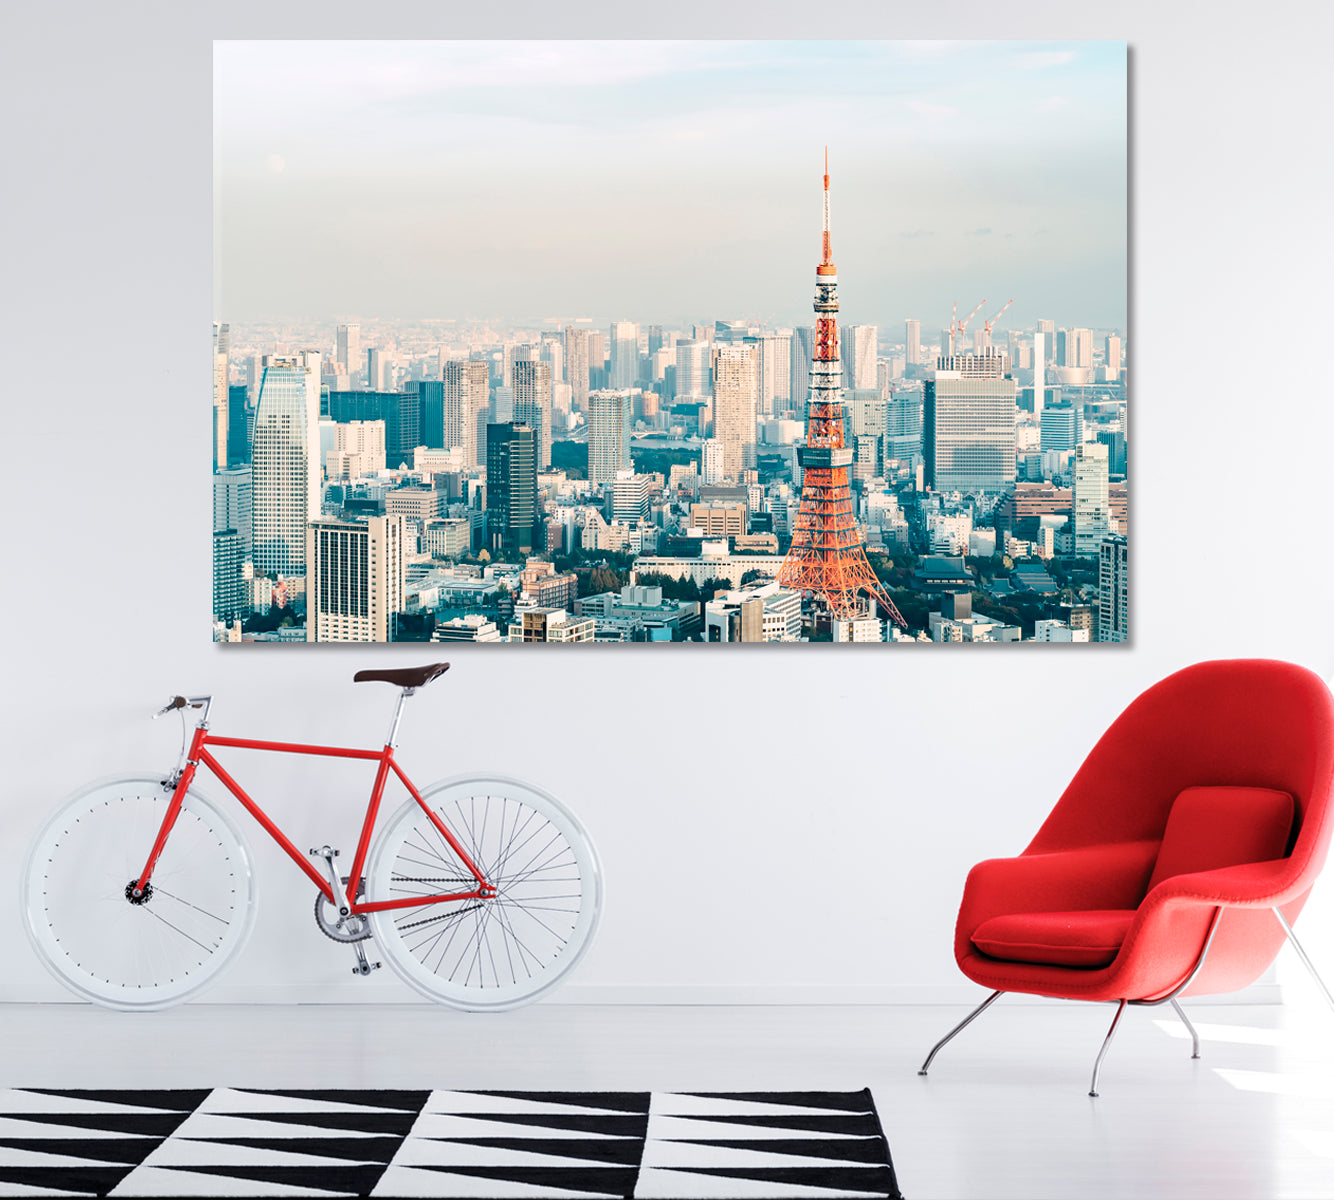 Tokyo Tower Japan Canvas Print ArtLexy 1 Panel 24"x16" inches 